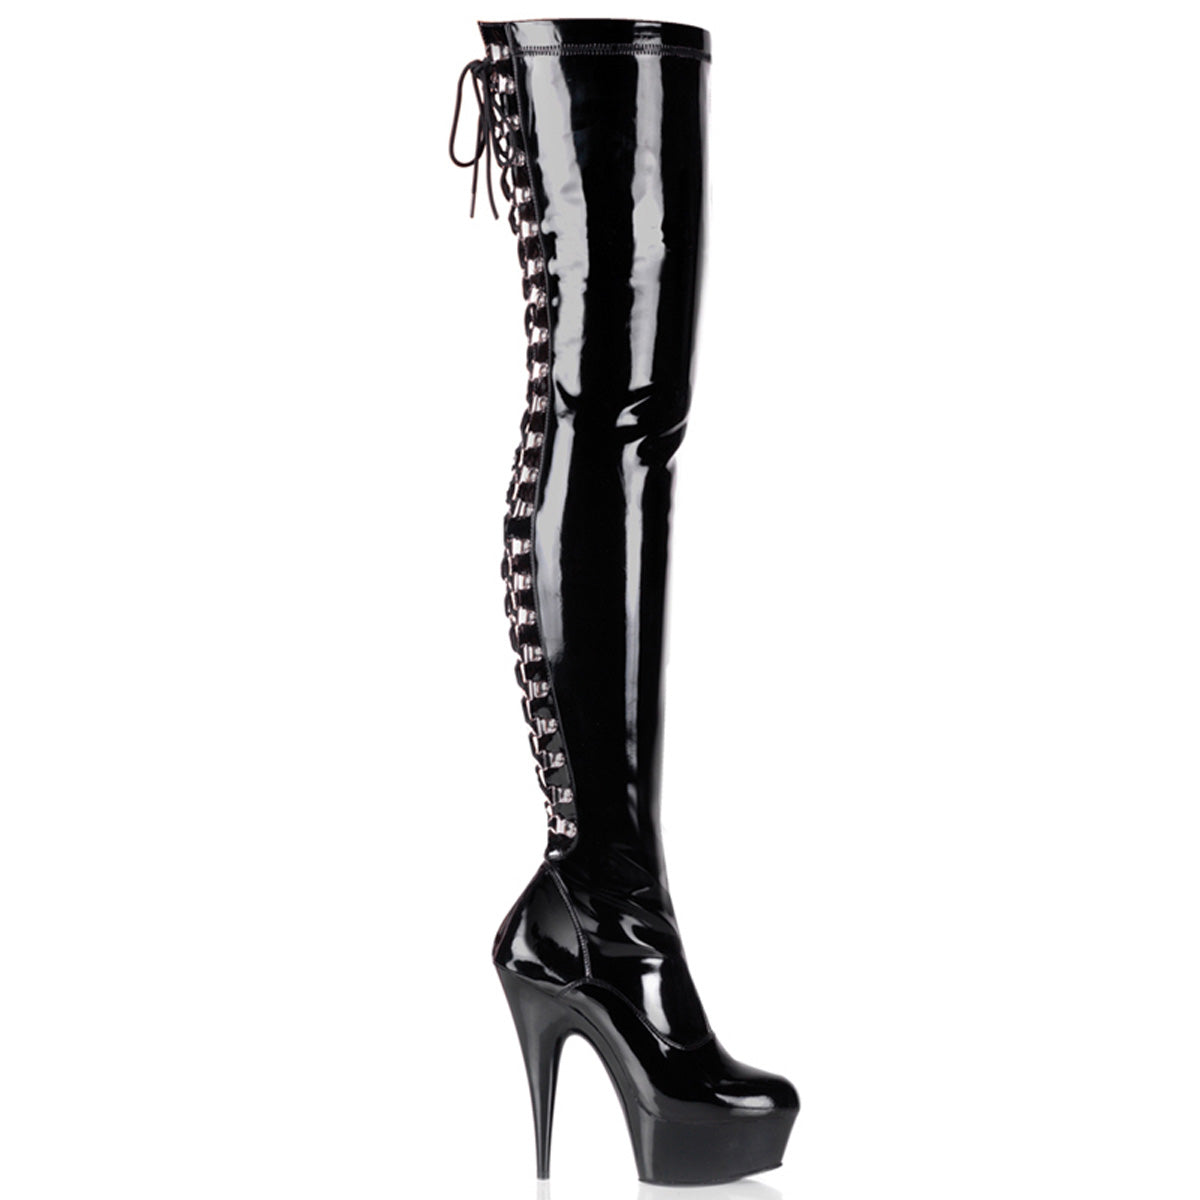 DELIGHT-3063 Black Stretch Patent Thigh Boot Pleaser